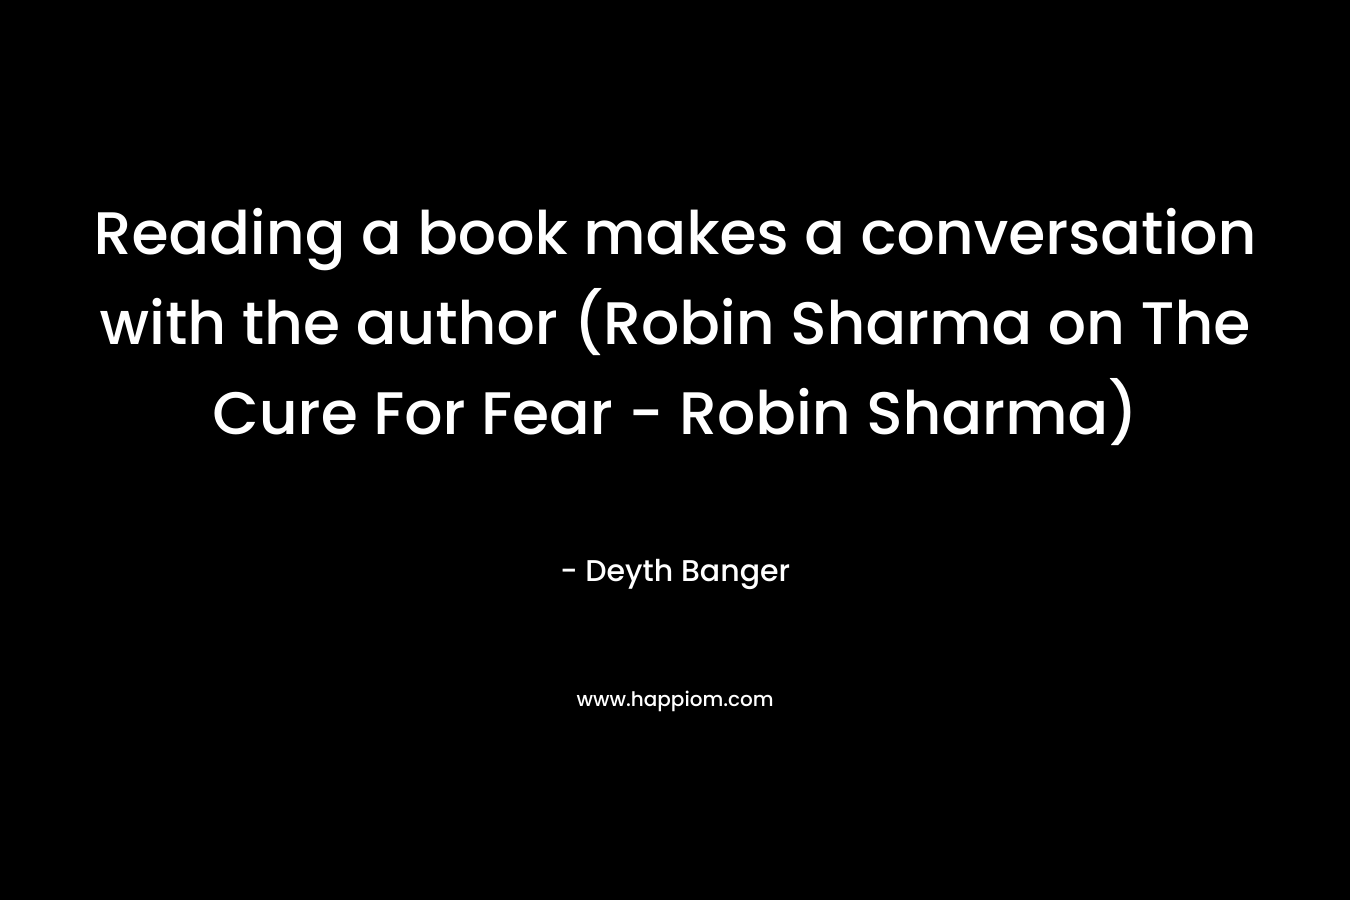 Reading a book makes a conversation with the author (Robin Sharma on The Cure For Fear – Robin Sharma) – Deyth Banger